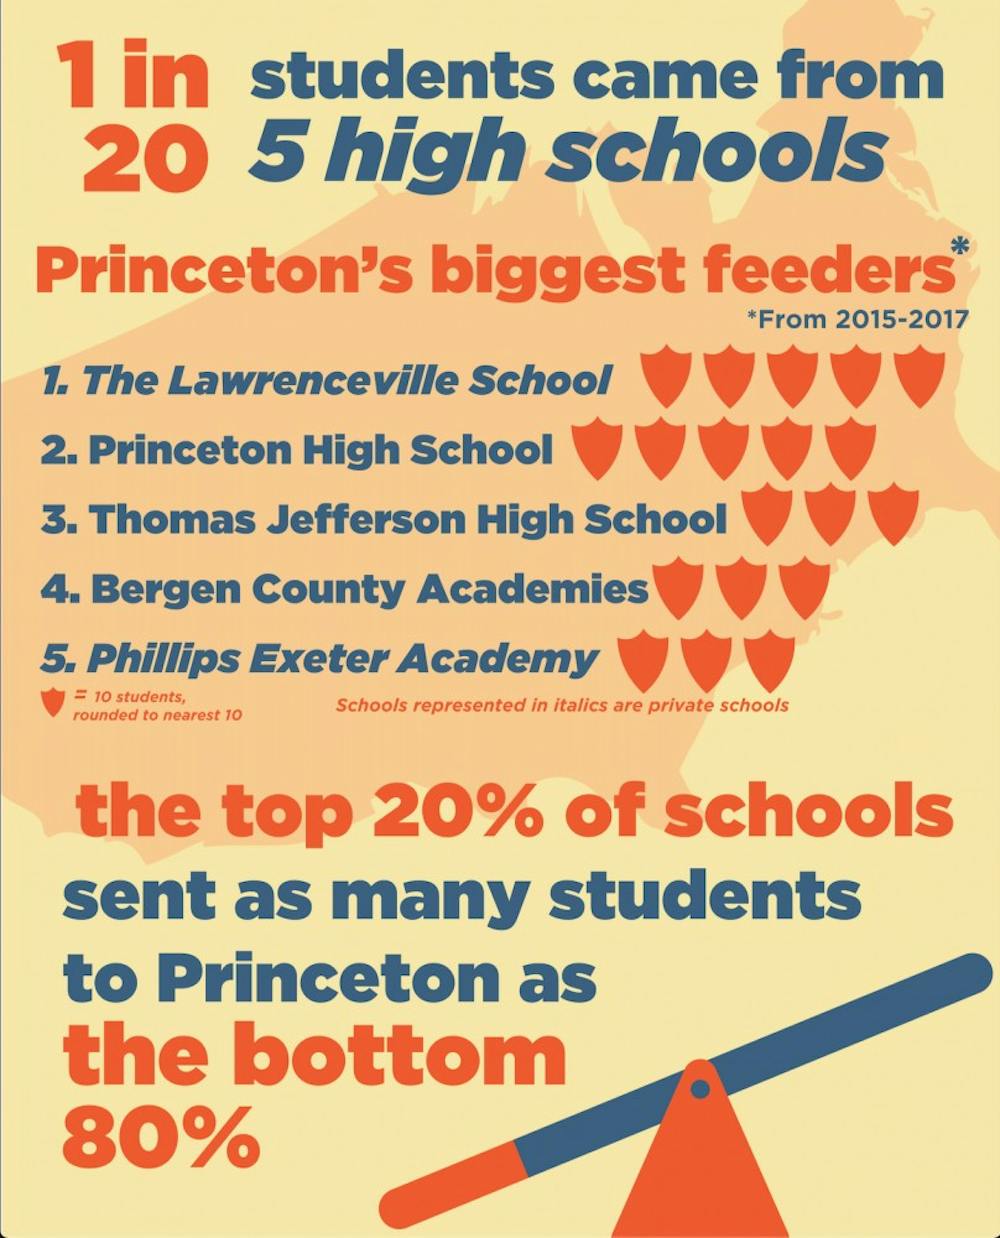 1 in 20 students came from 5 high schools